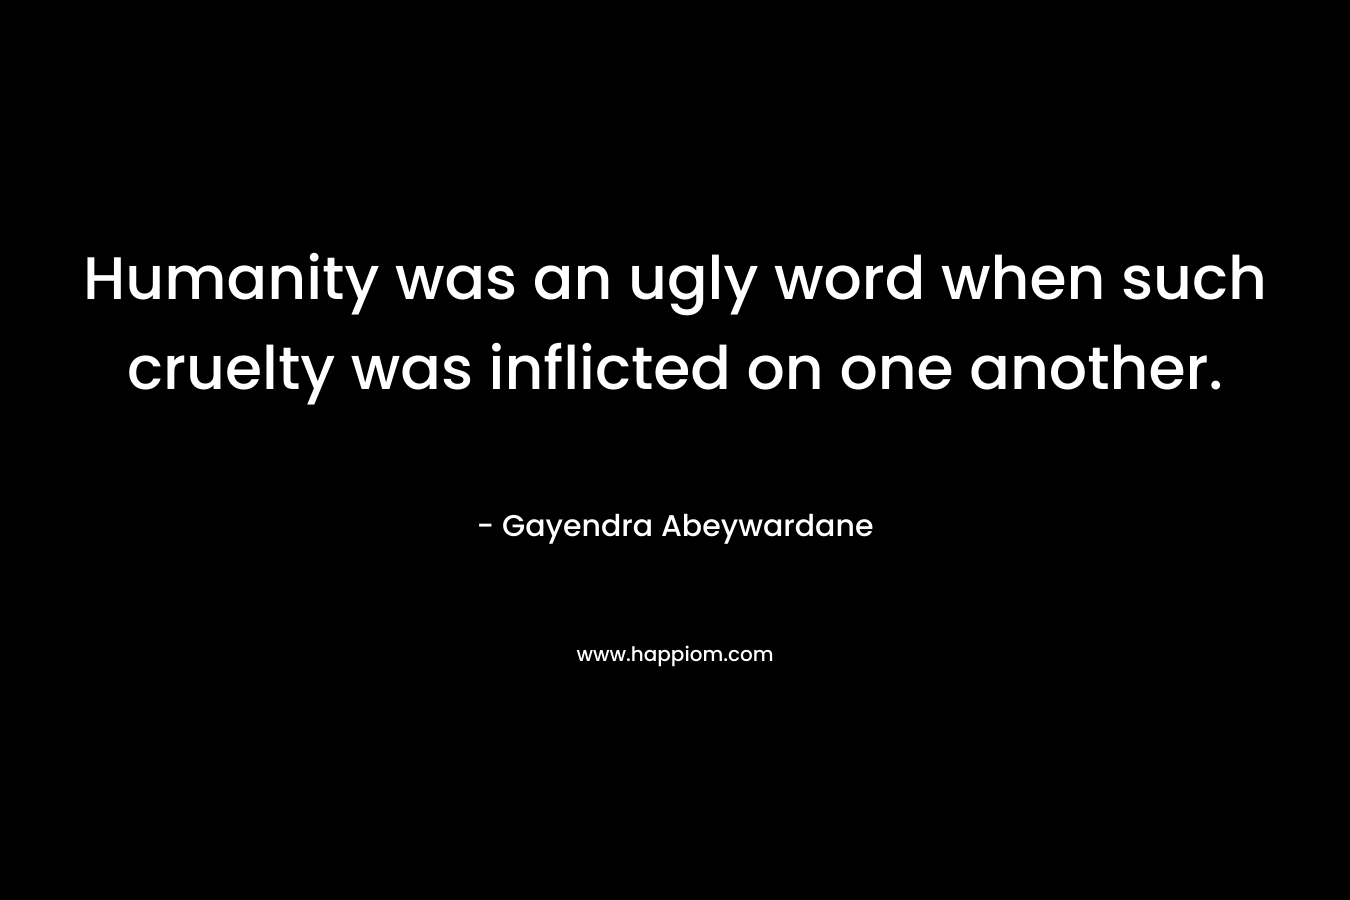 Humanity was an ugly word when such cruelty was inflicted on one another. – Gayendra Abeywardane